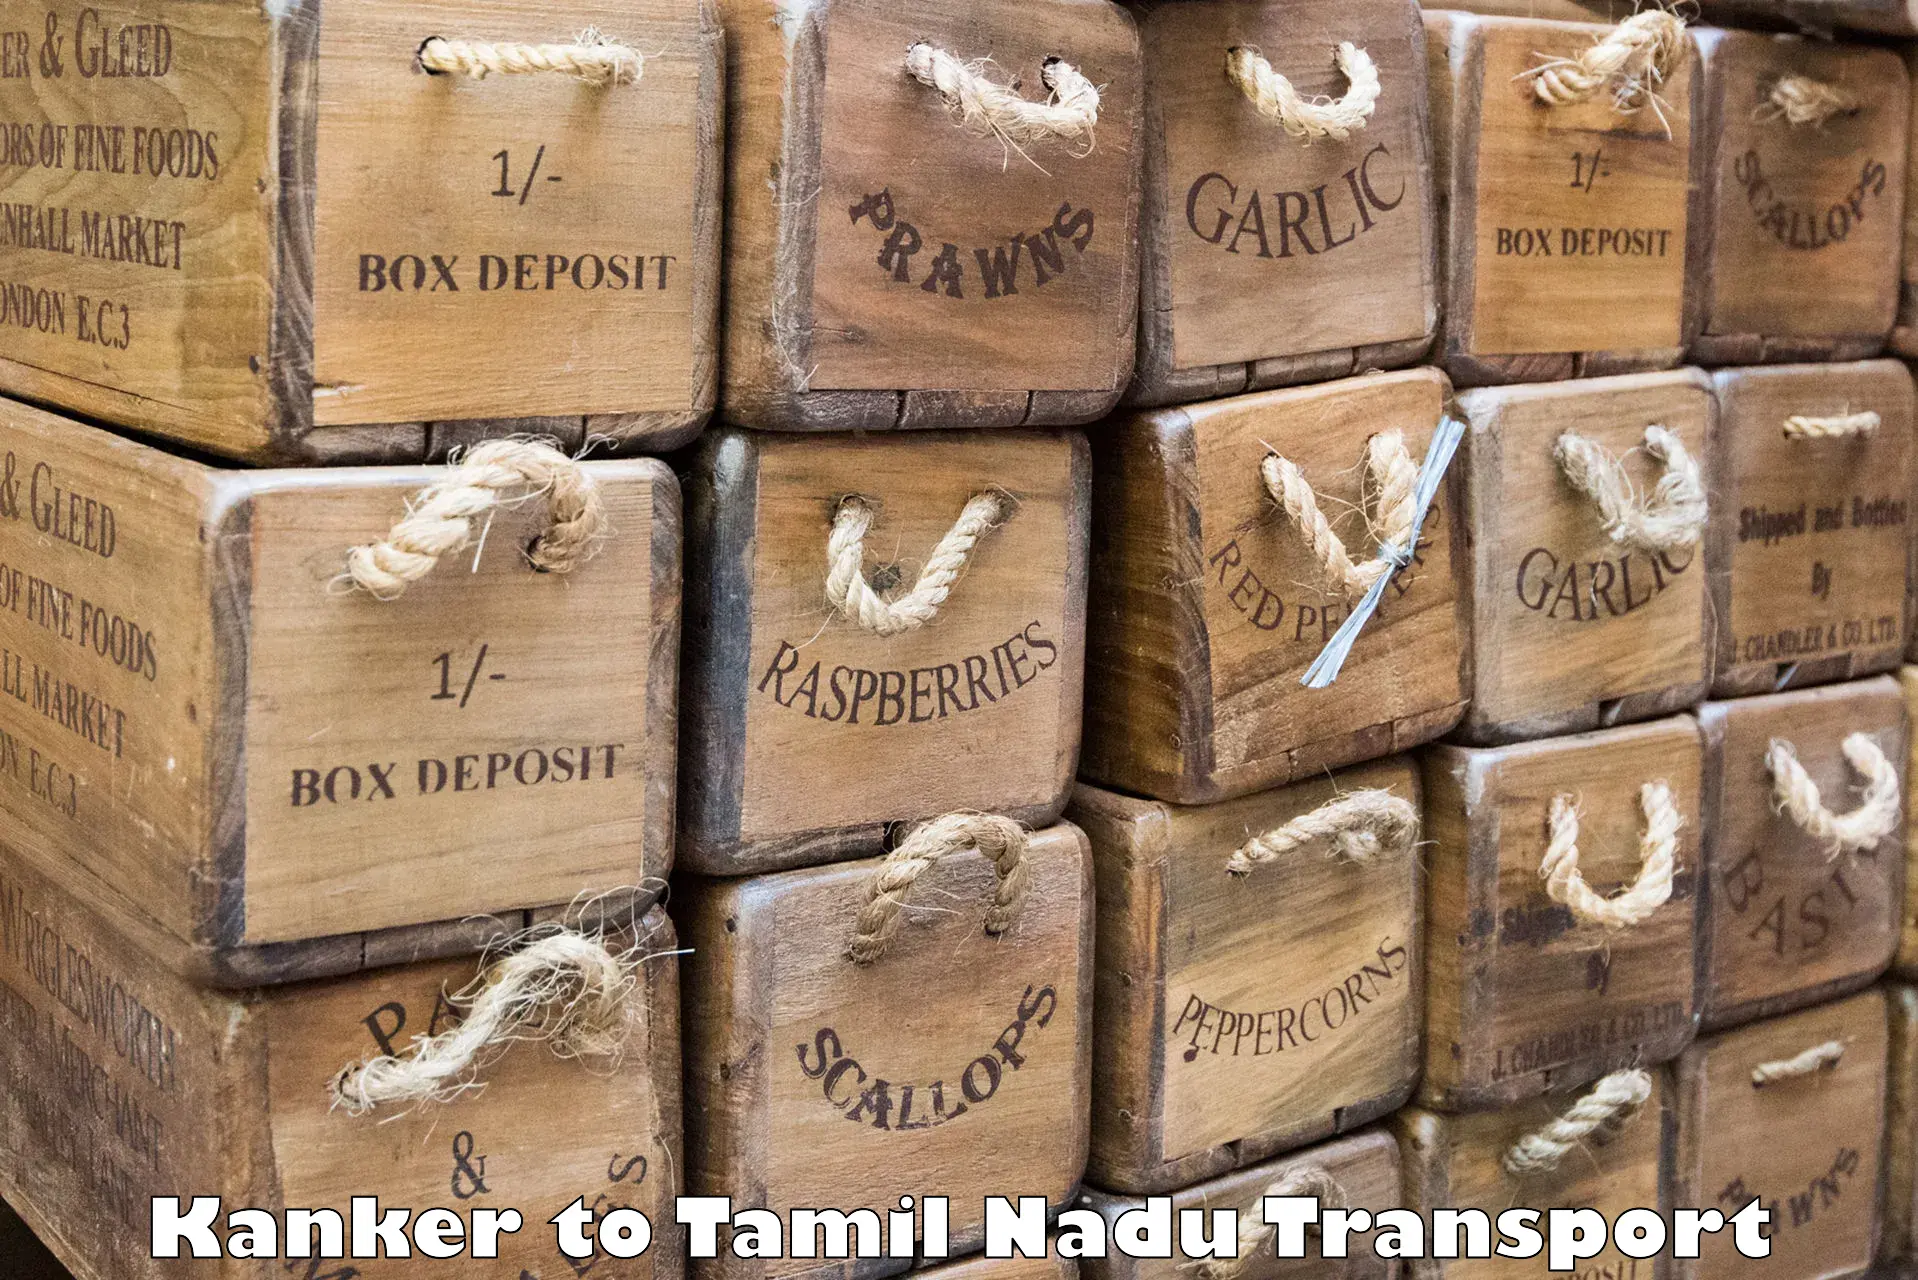 Air freight transport services Kanker to Tiruchi